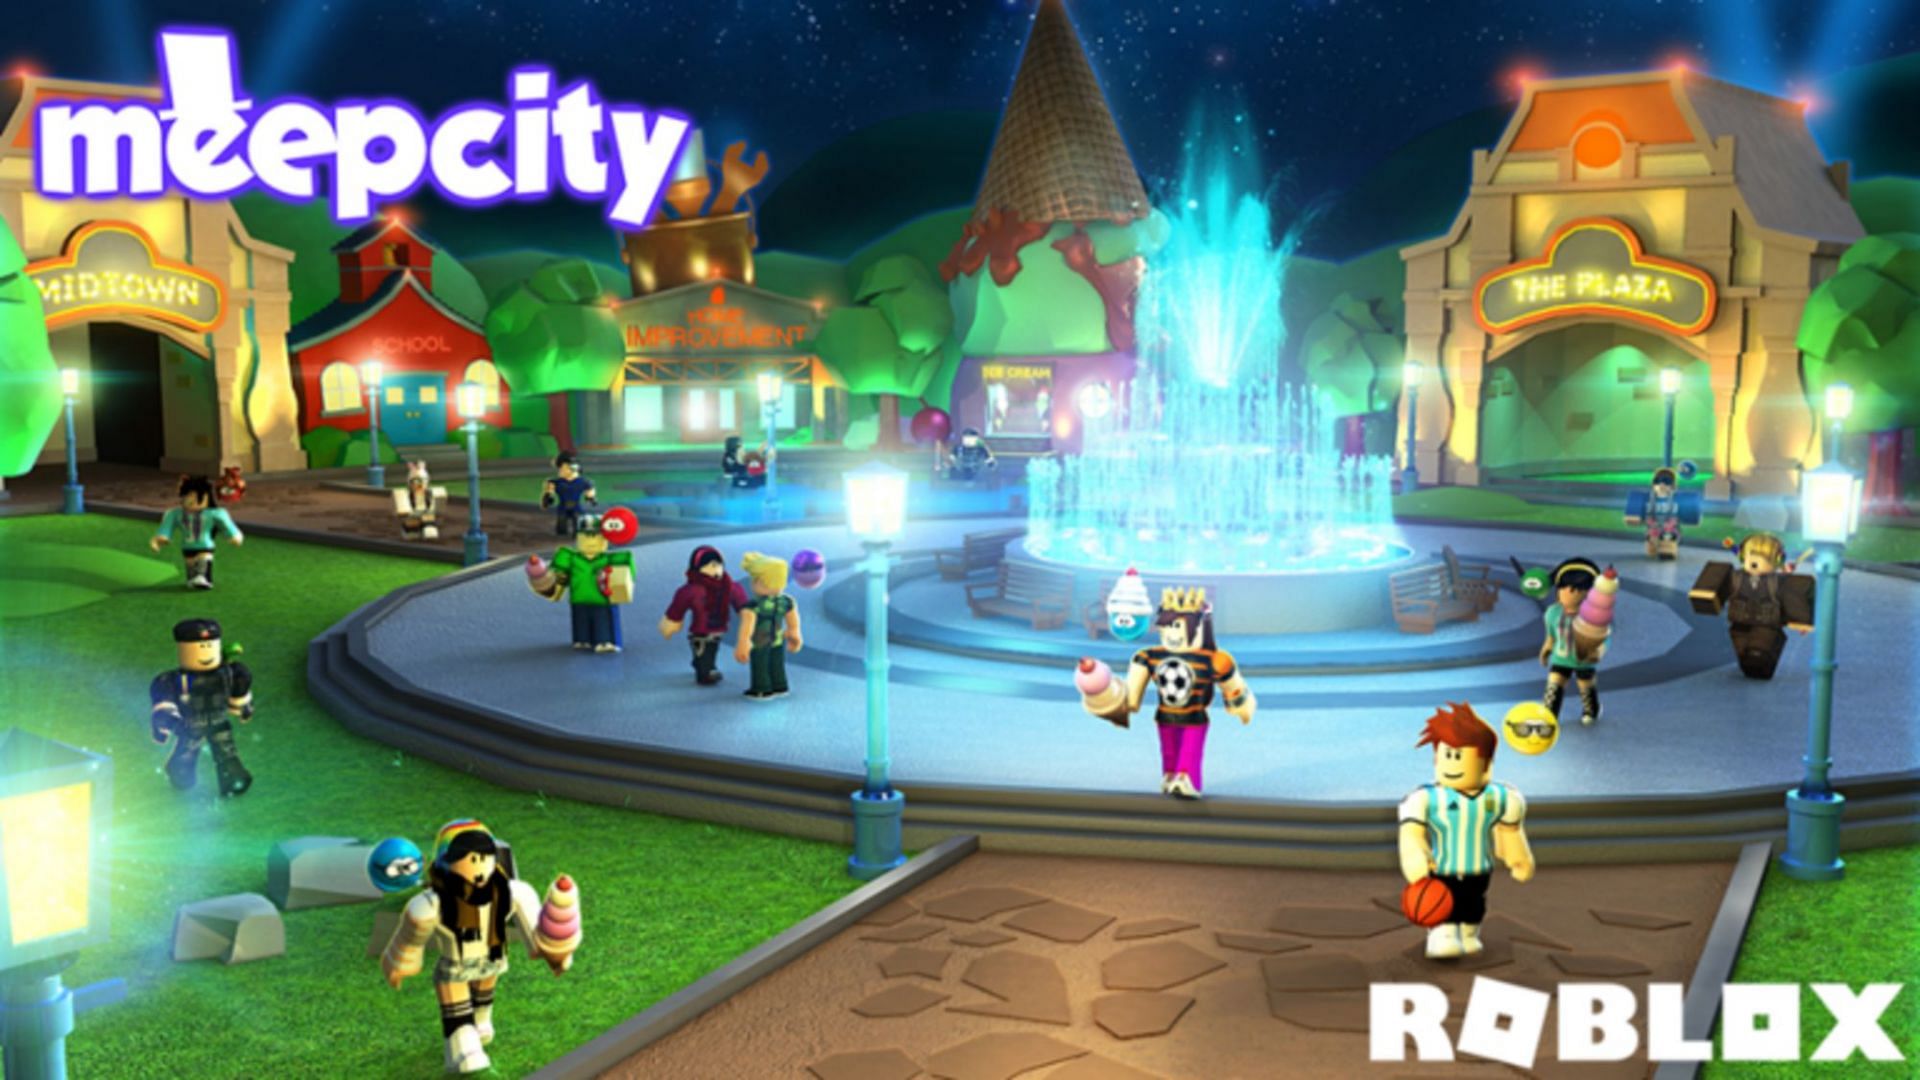 Beautifully decorate your estates in Roblox MeepCity (Image via Roblox)